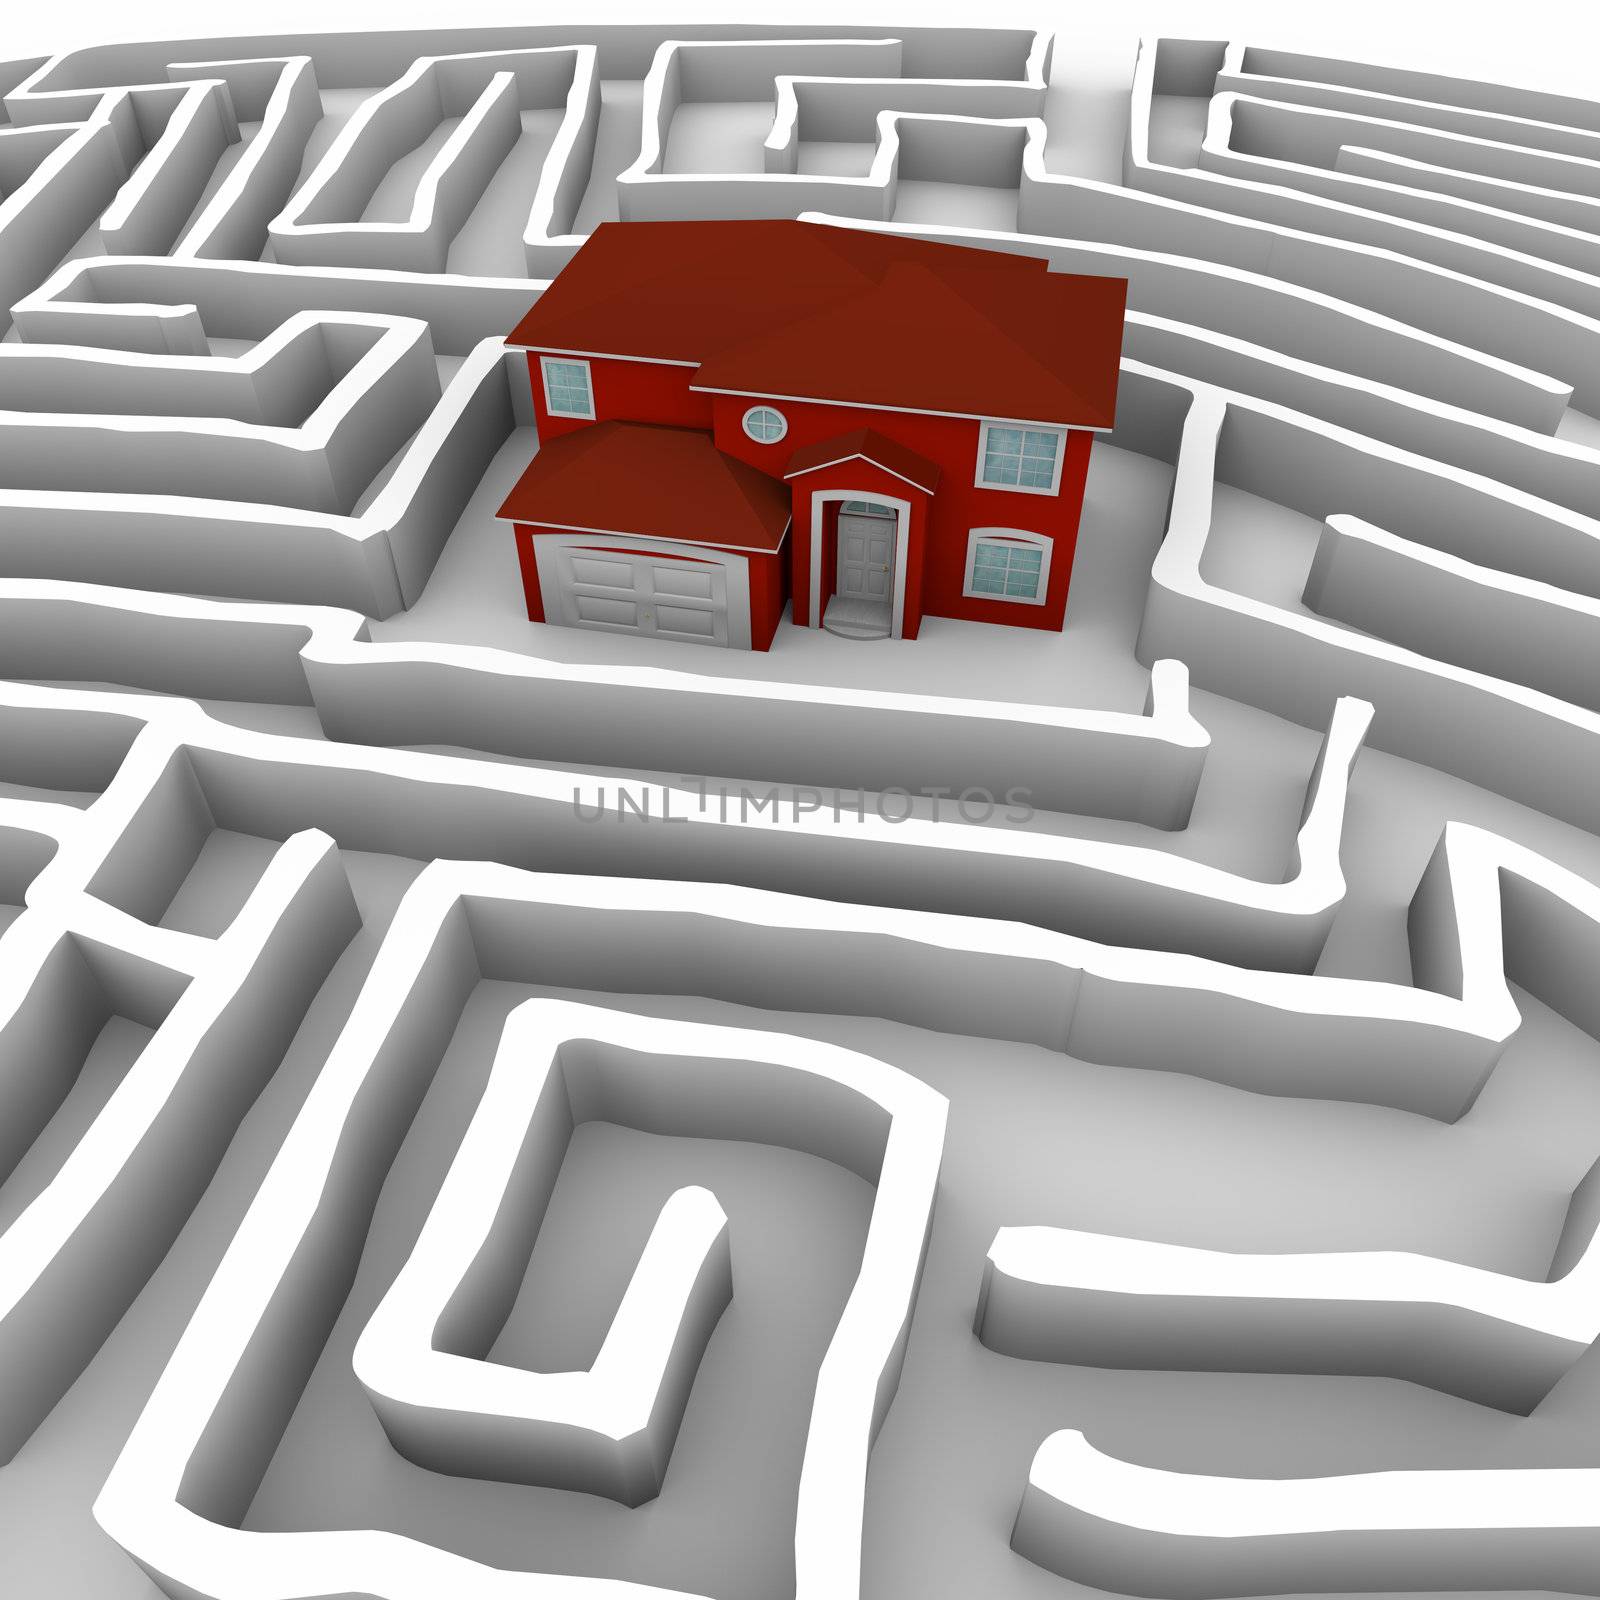 Red Home in Maze - Find Path to Ownership by iQoncept